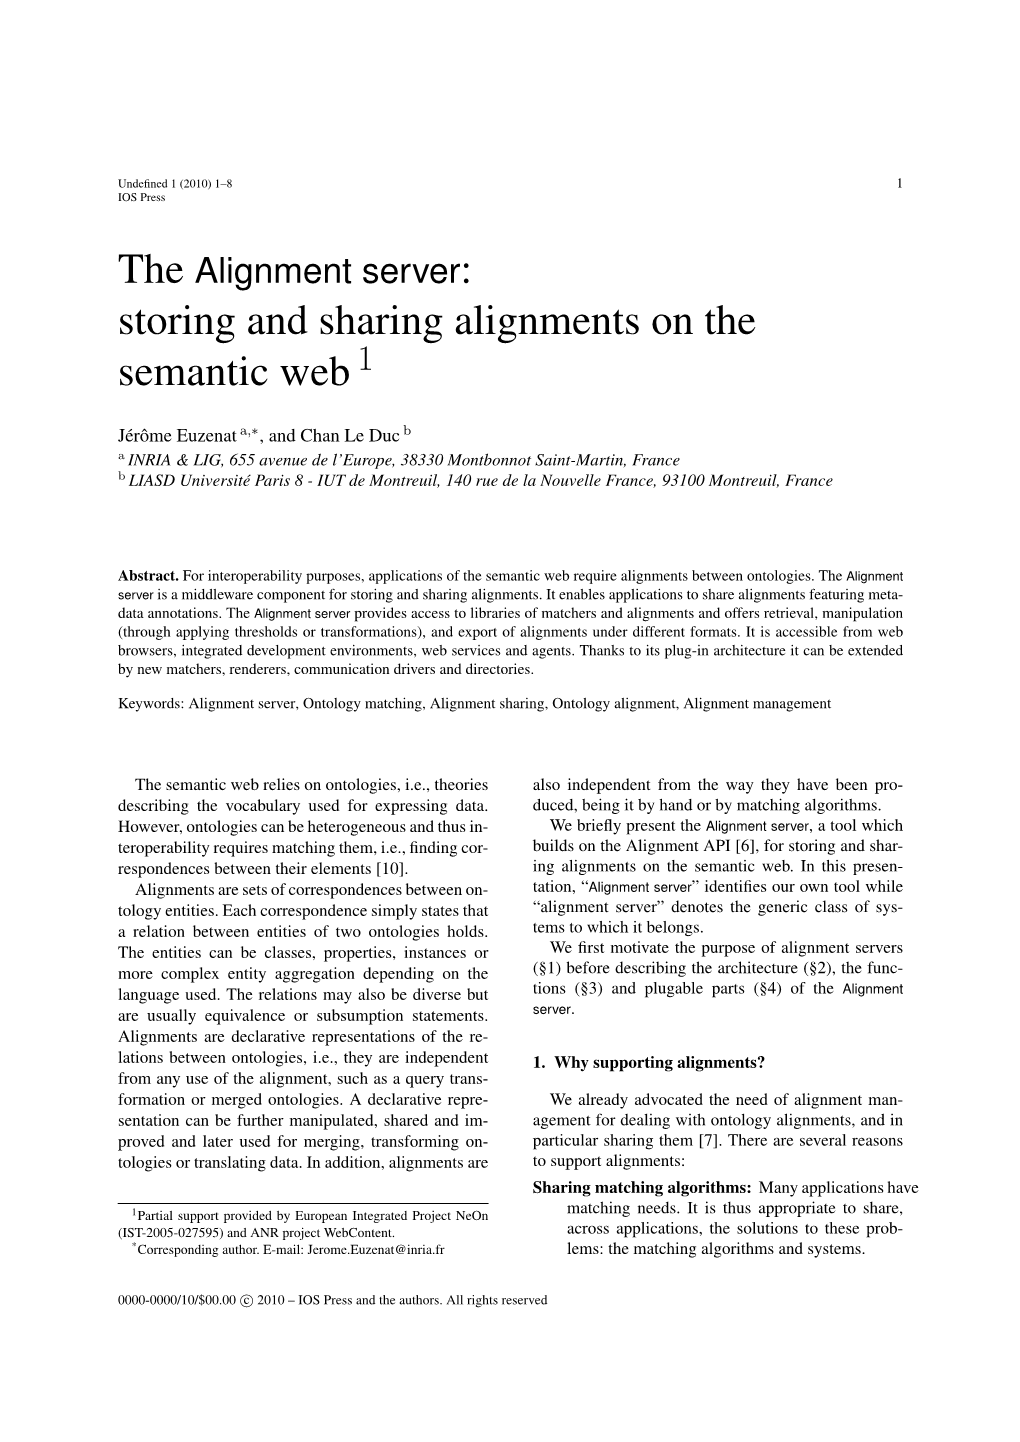 Storing and Sharing Alignments on the Semantic Web 1